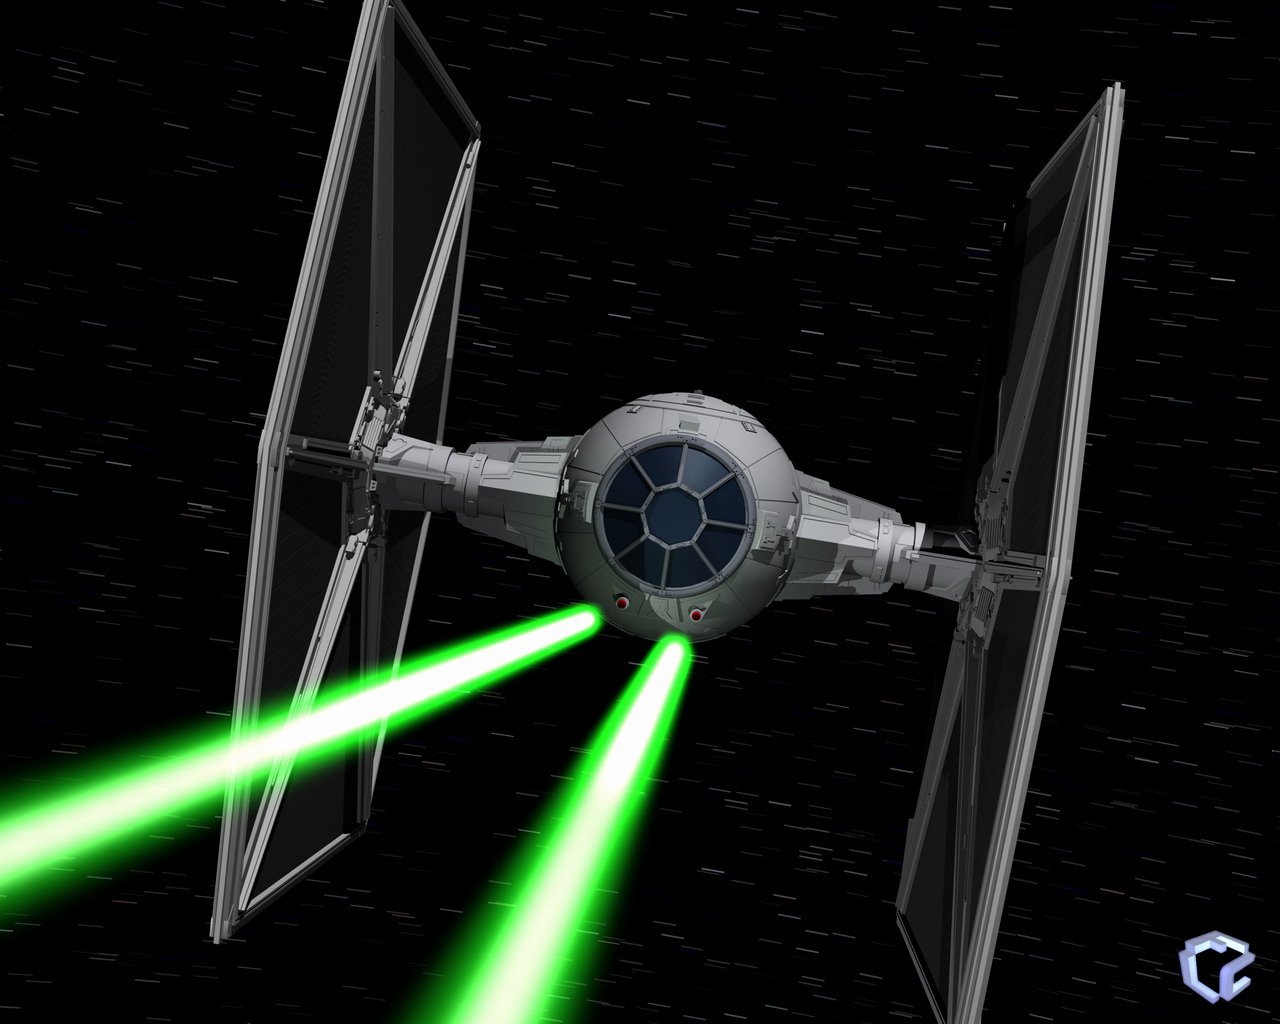 TIE Fighter by FLCN on